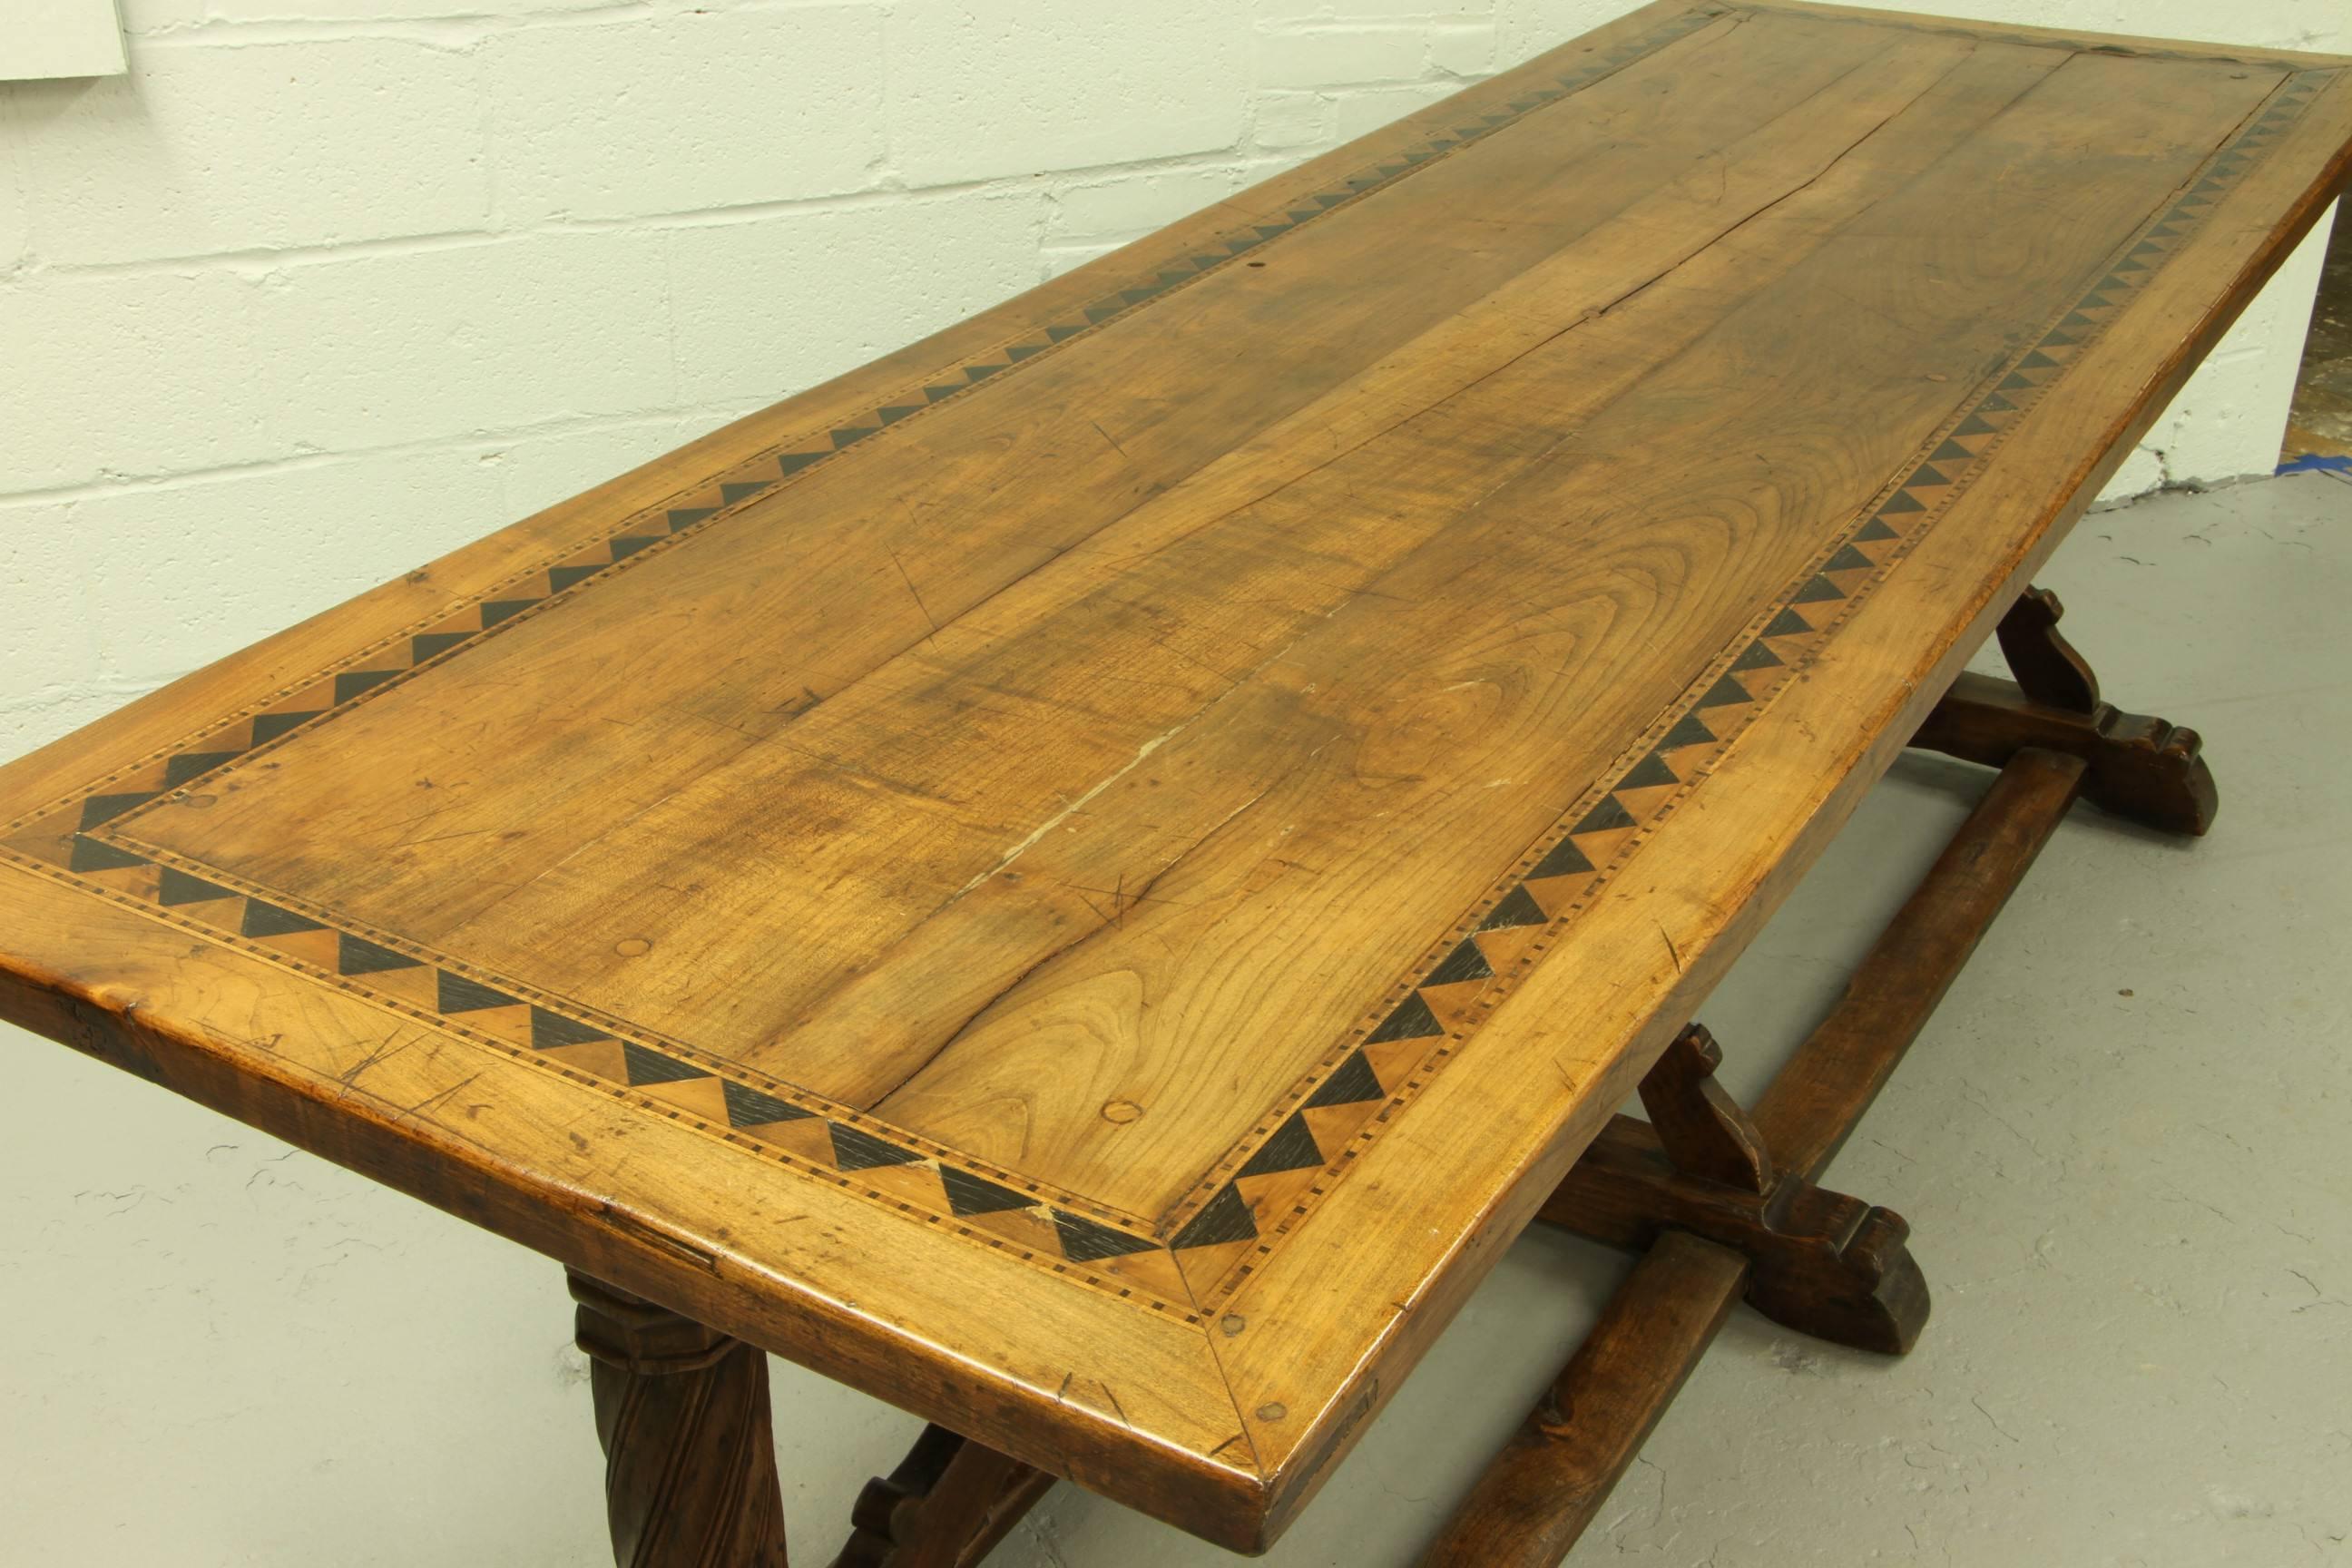 A truly magnificent trestle table with excellent proportions, satinwood and ebony inlaid top, double stretchers and serpentine trestles. There are some old restorations consistent with the age of this great piece. Overall condition is excellent.